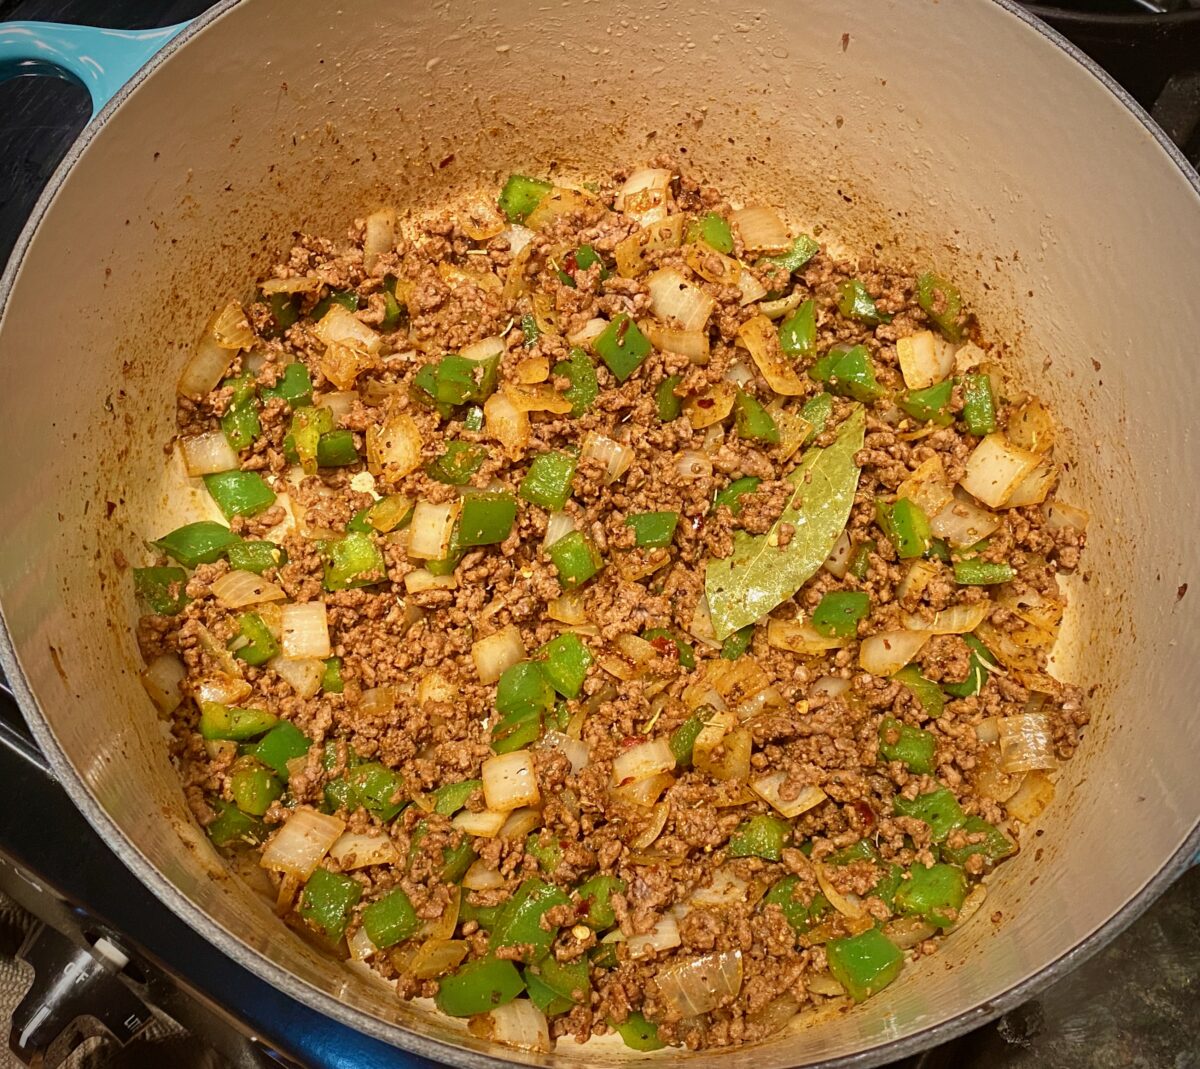 Top view of browned ground beef with onions and green peppers and all the goulash spices added.